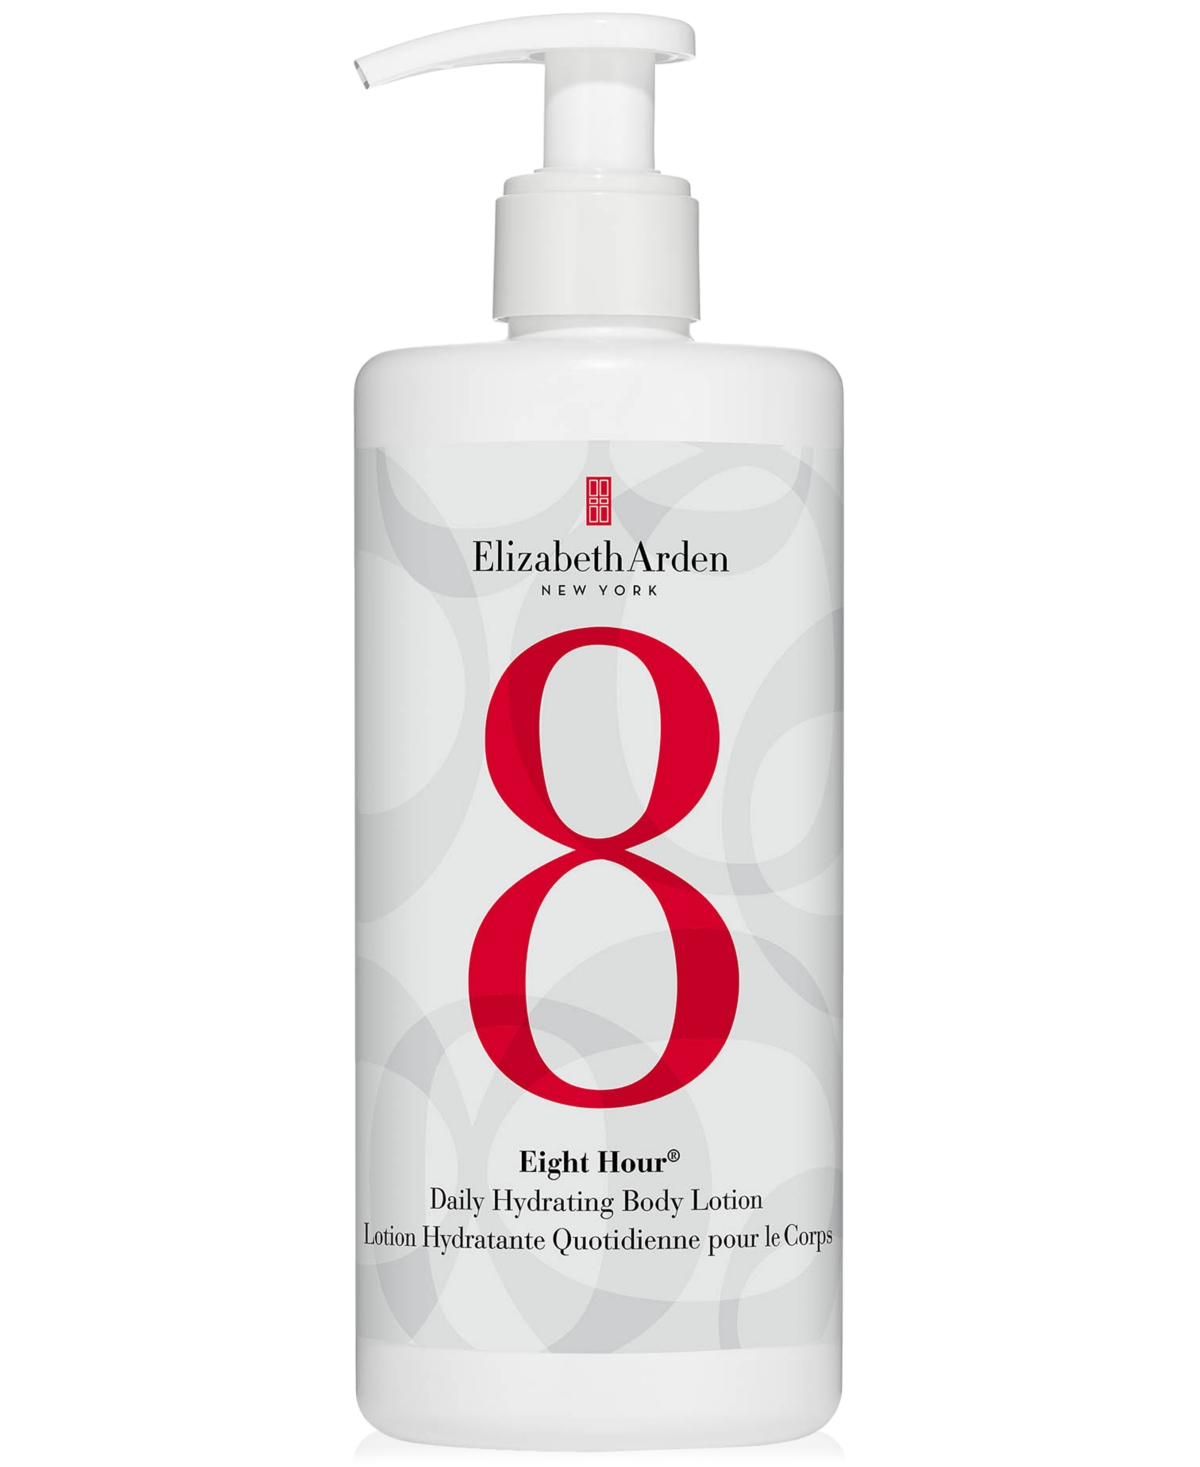 Eight Hour Daily Hydrating Body Lotion